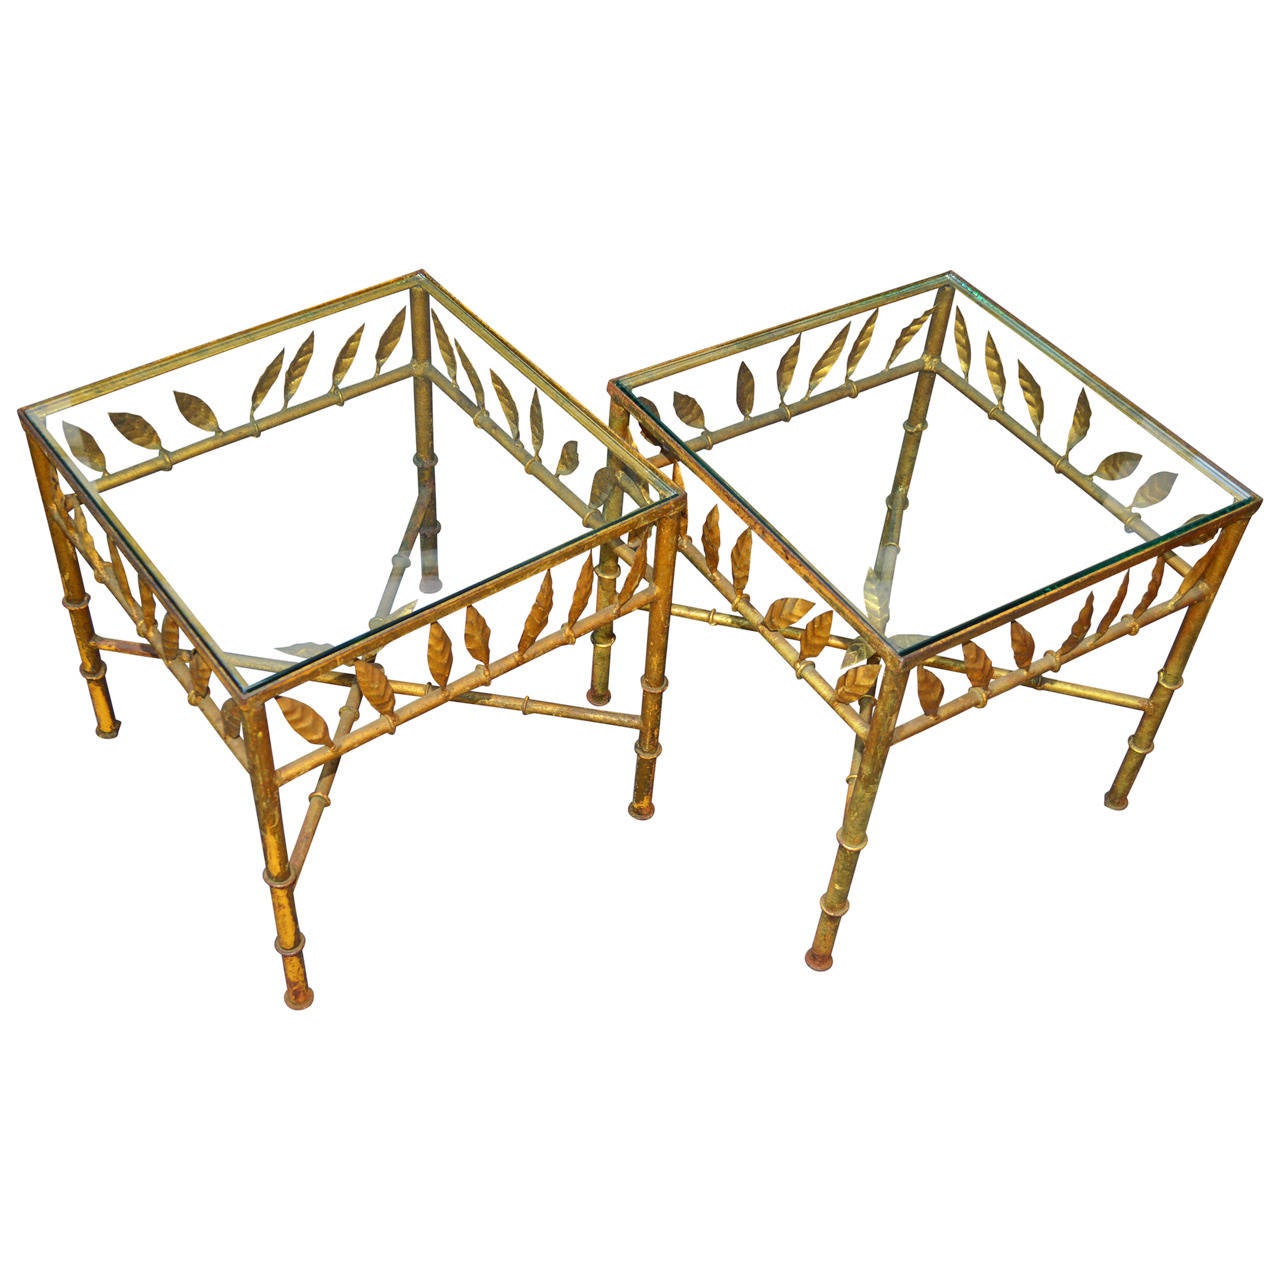 This is a beautiful pair of gilded leaf side tables. Can be used separate or together to create a versatile cocktail table.